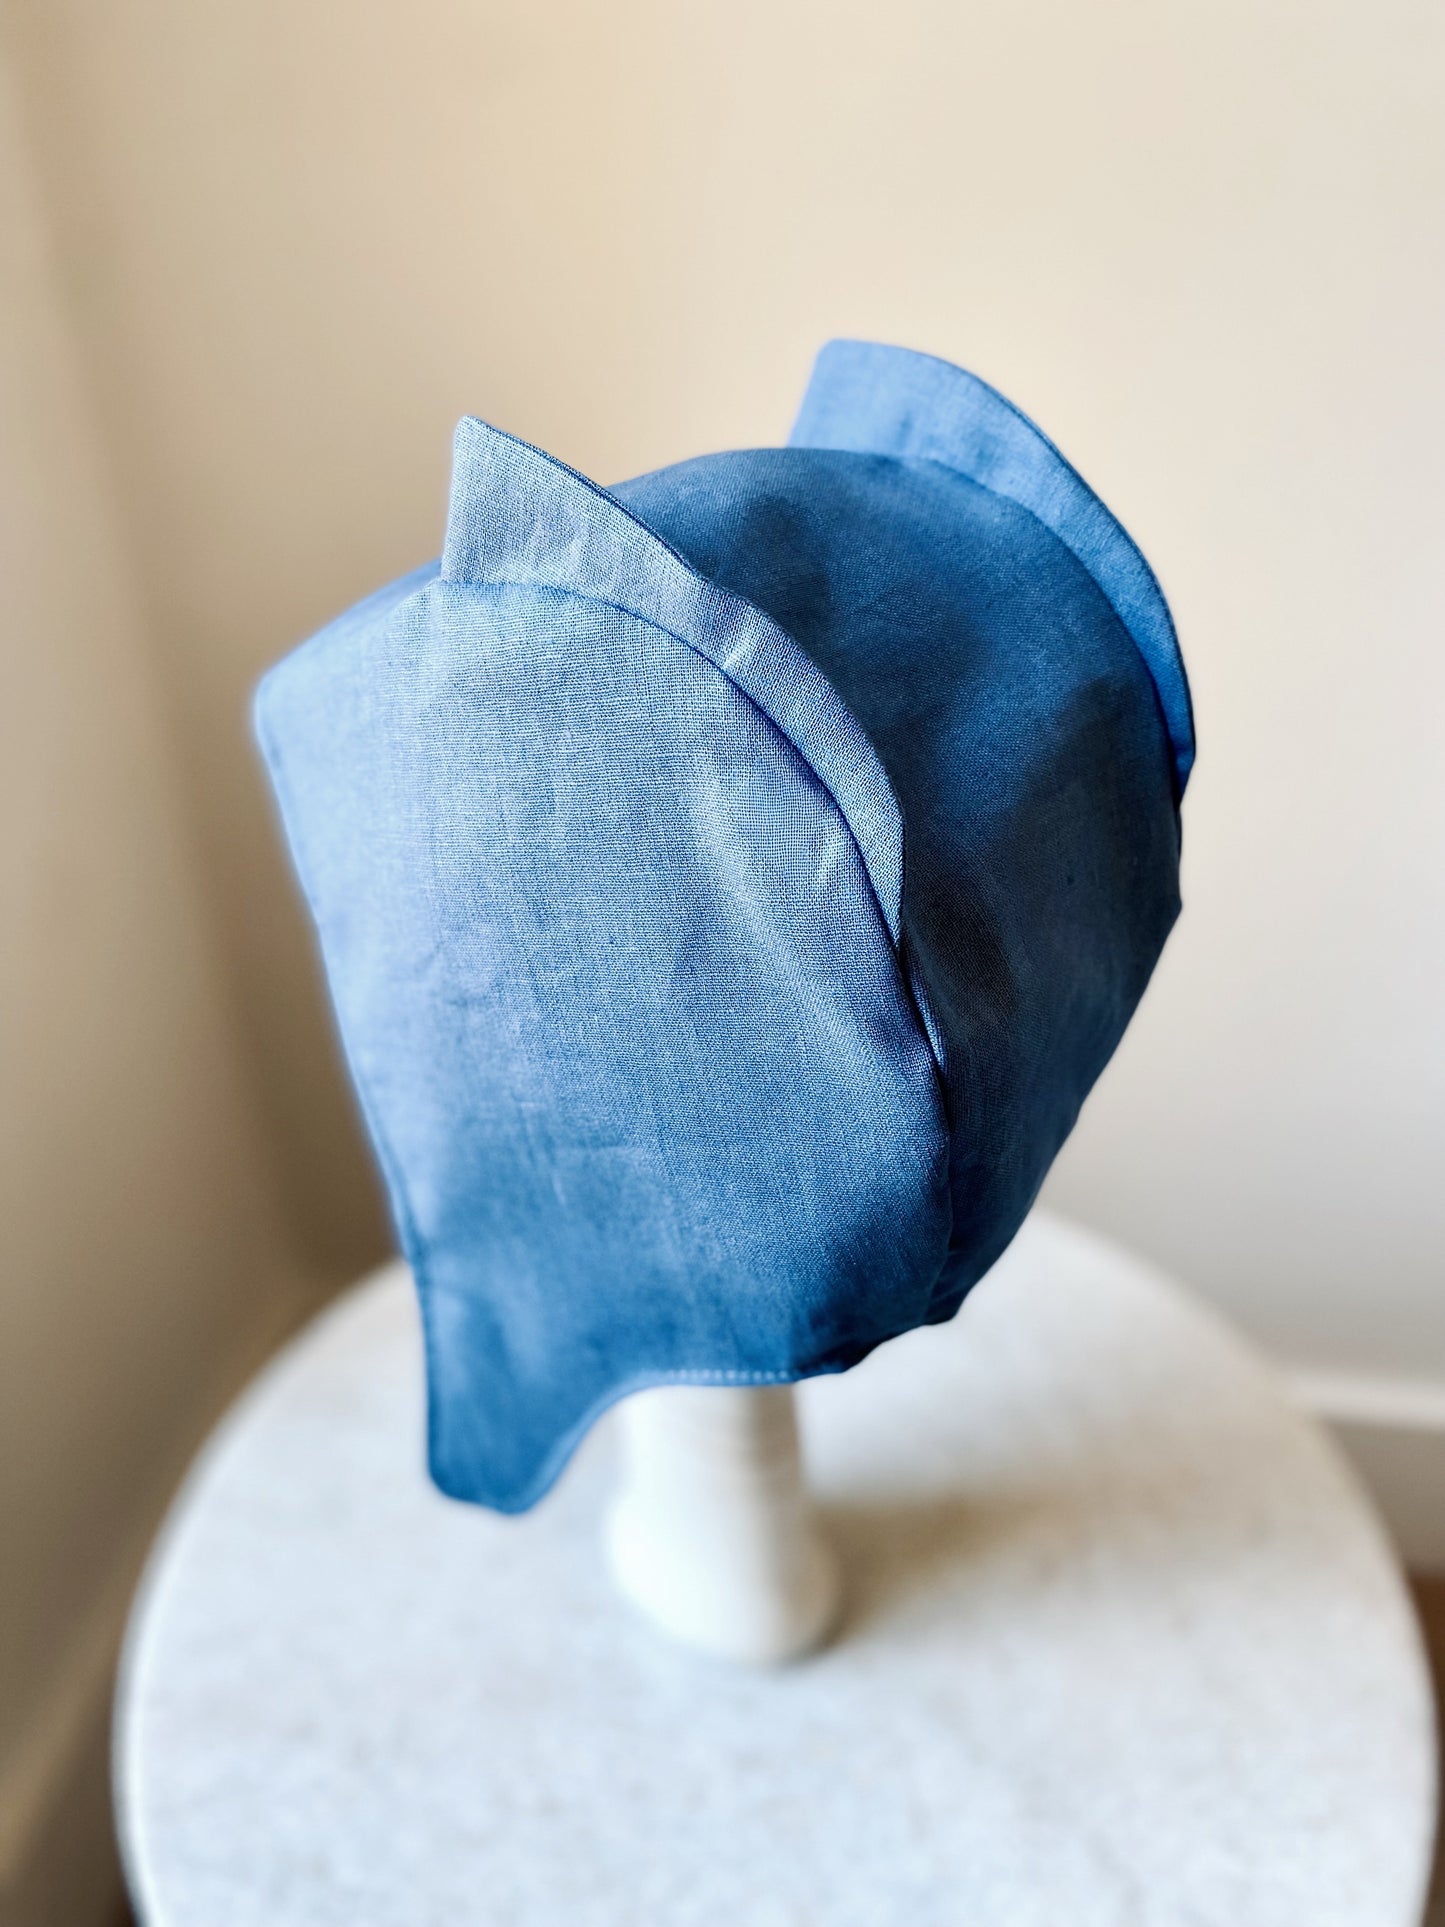 Blue stingray costume hat with fins for kids.